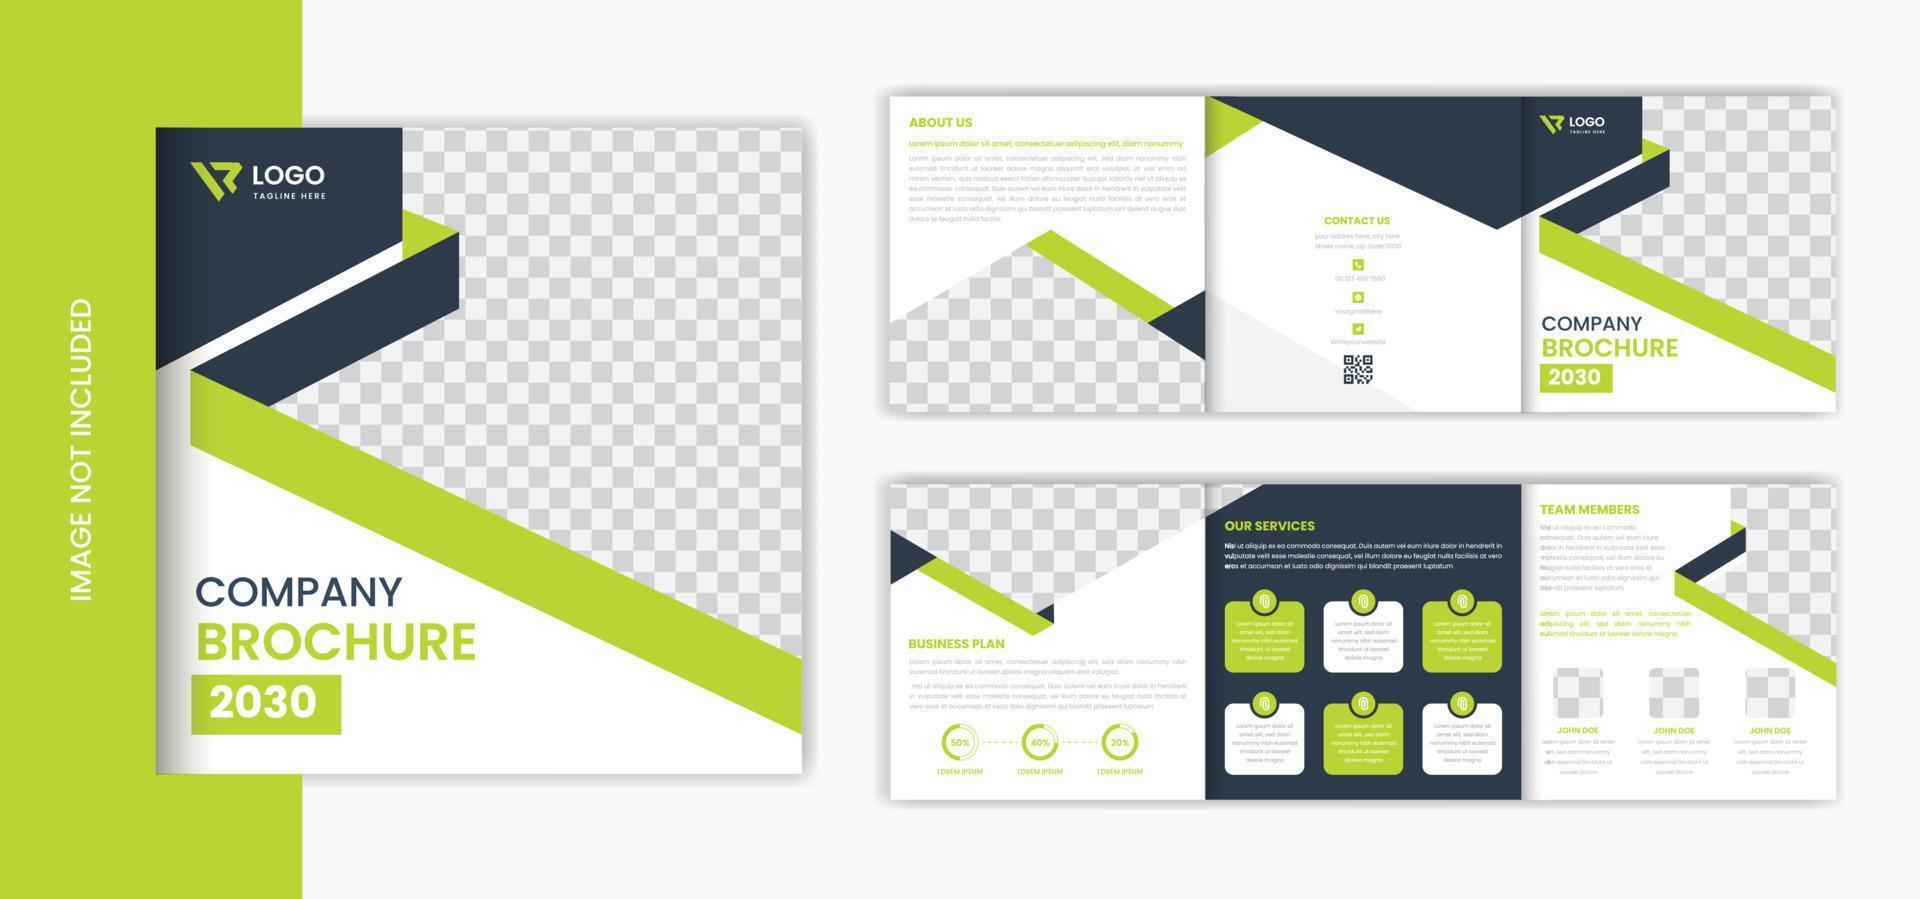 Green business square trifold brochure design, abstract brochure vector